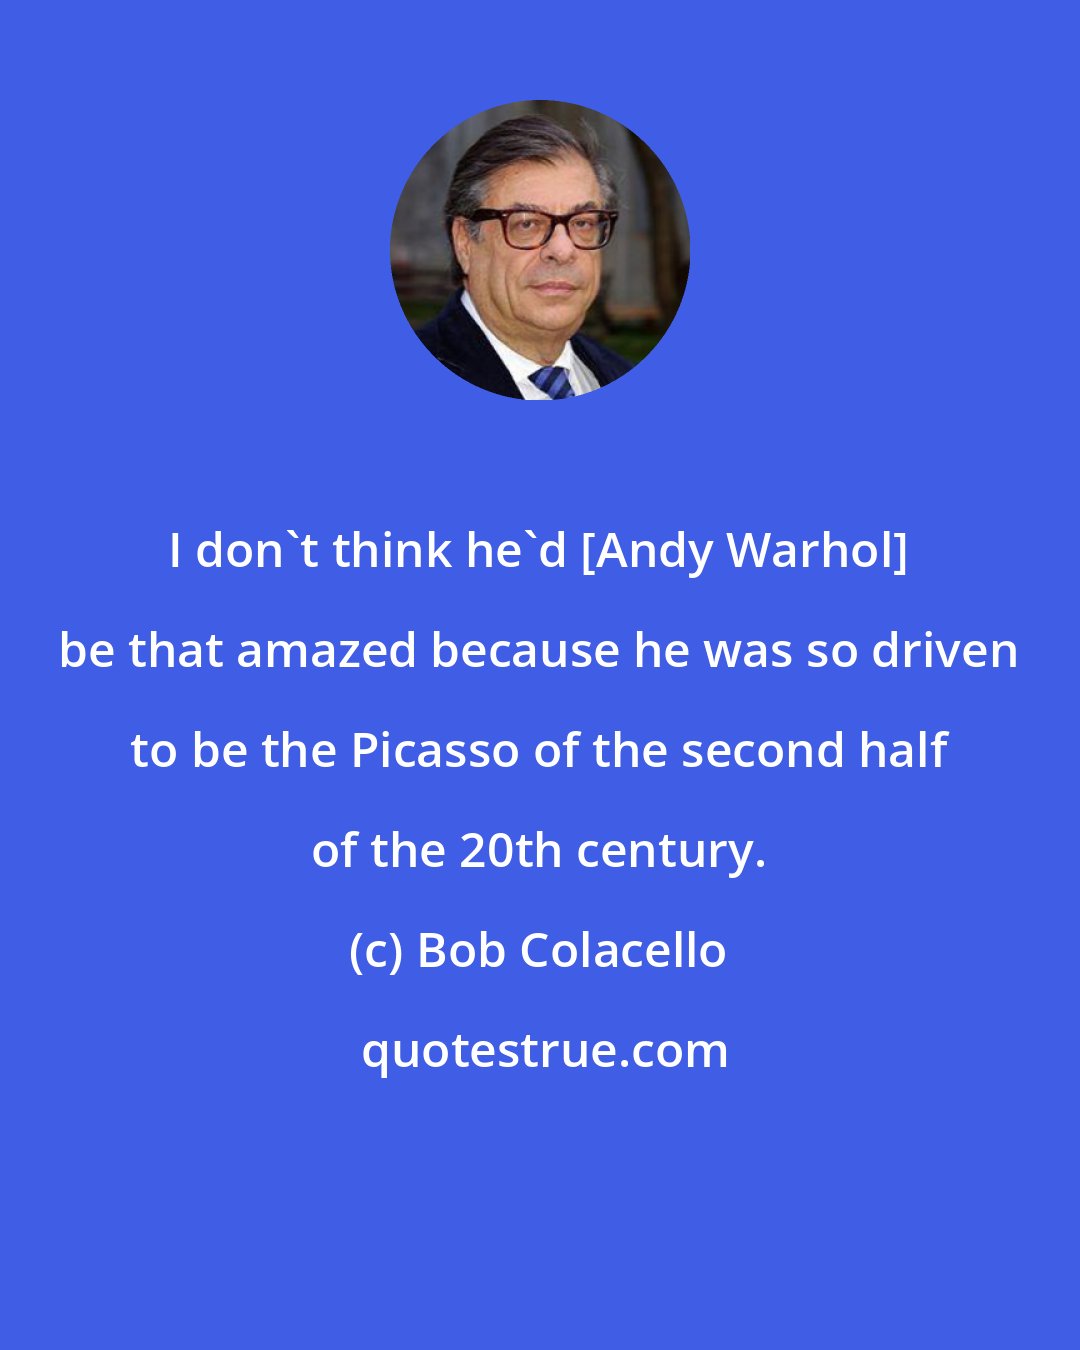 Bob Colacello: I don't think he'd [Andy Warhol] be that amazed because he was so driven to be the Picasso of the second half of the 20th century.